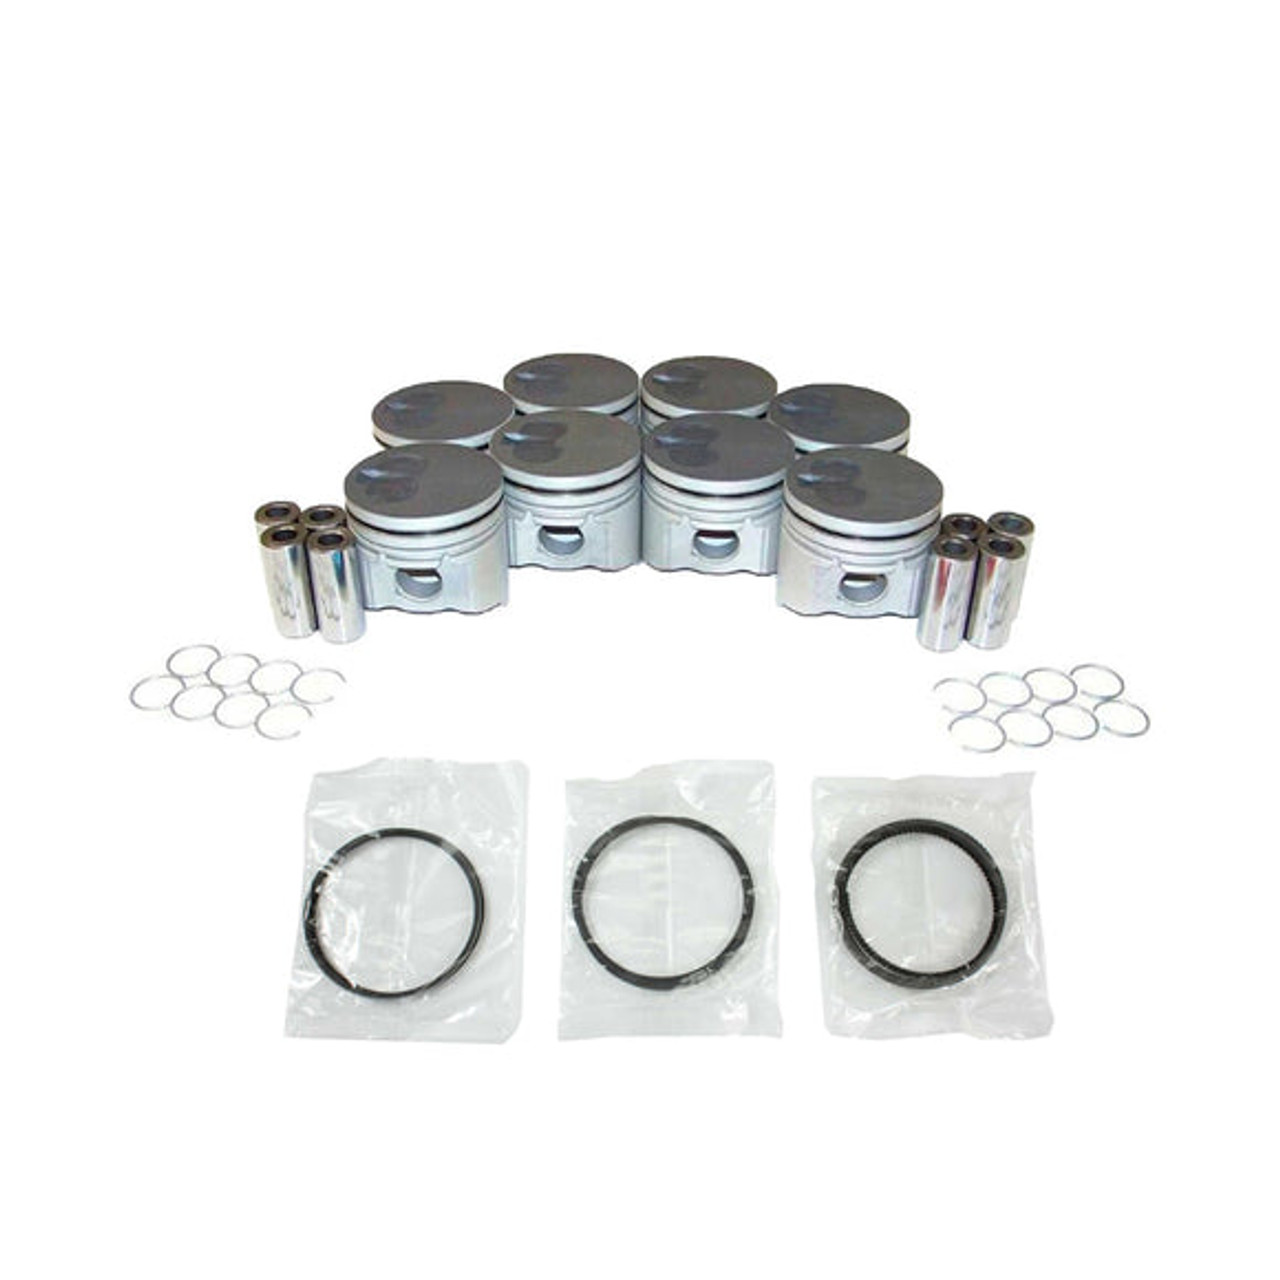 Piston Set with Rings - 2004 Hummer H1 6.5L Engine Parts # PRK3195ZE505